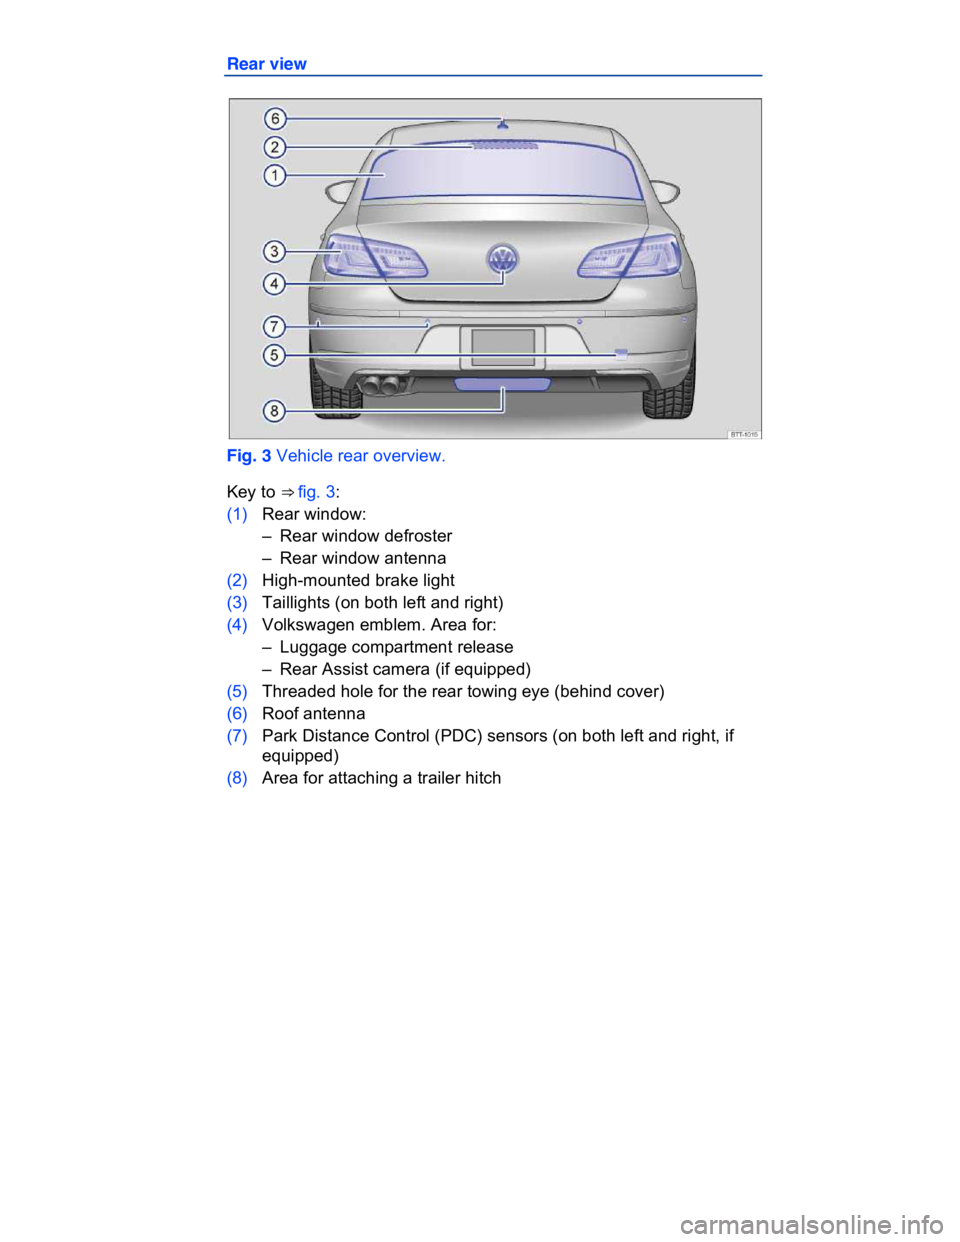 VOLKSWAGEN CC 2016  Owners Manual  
Rear view 
 
Fig. 3 Vehicle rear overview. 
Key to ⇒ fig. 3: 
(1) Rear window: 
–  Rear window defroster  
–  Rear window antenna  
(2) High-mounted brake light 
(3) Taillights (on both left